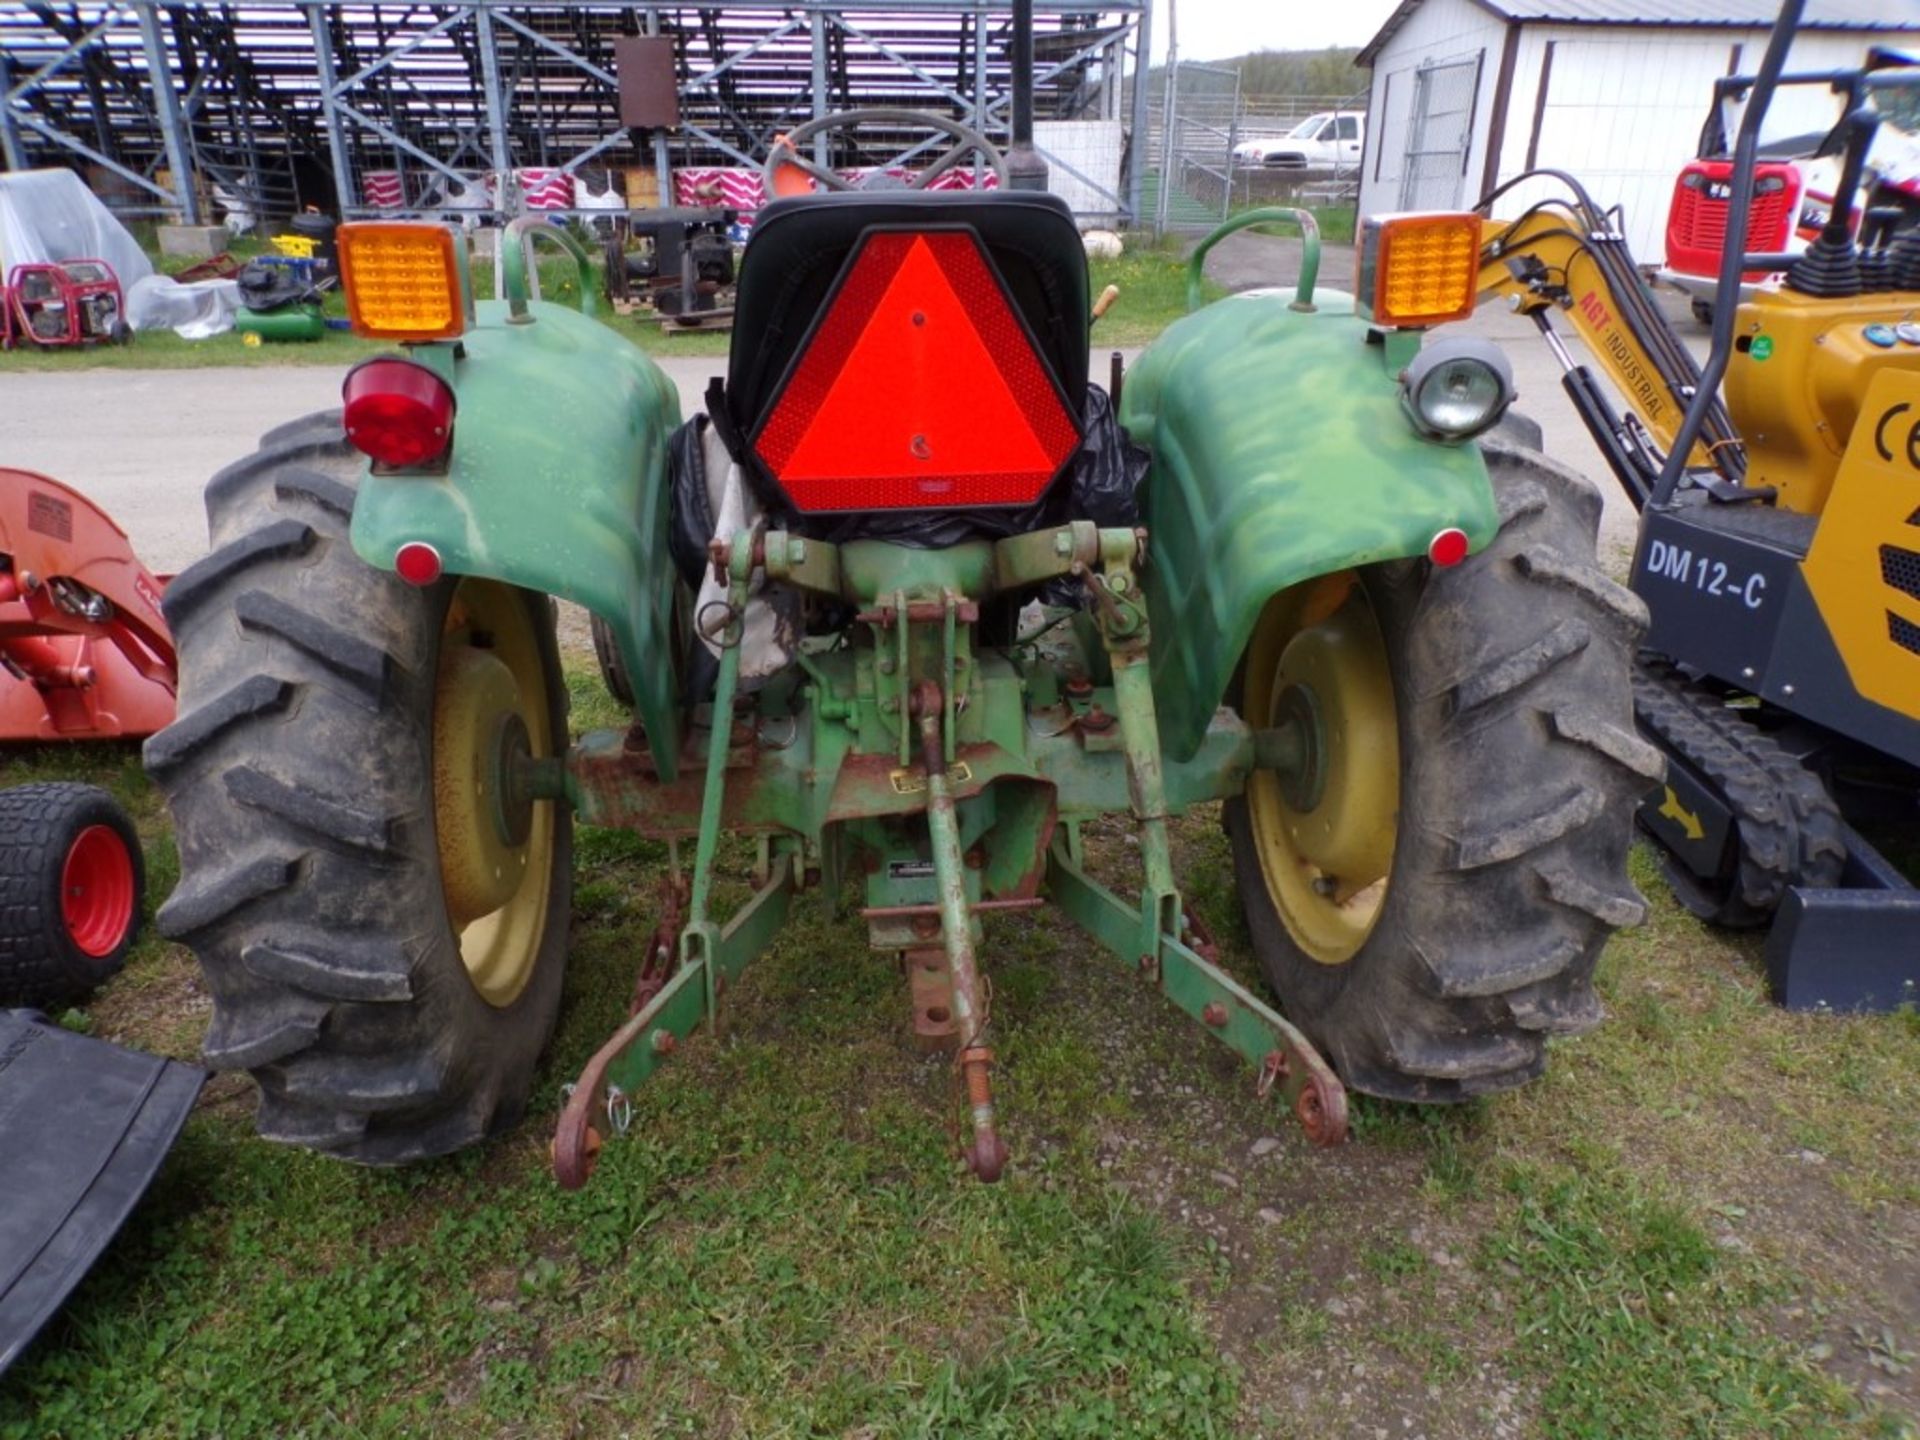 John Deere 850, 2 WD, Compact, 3 PT Hitch, 1912 Hours (5417) - Image 3 of 3